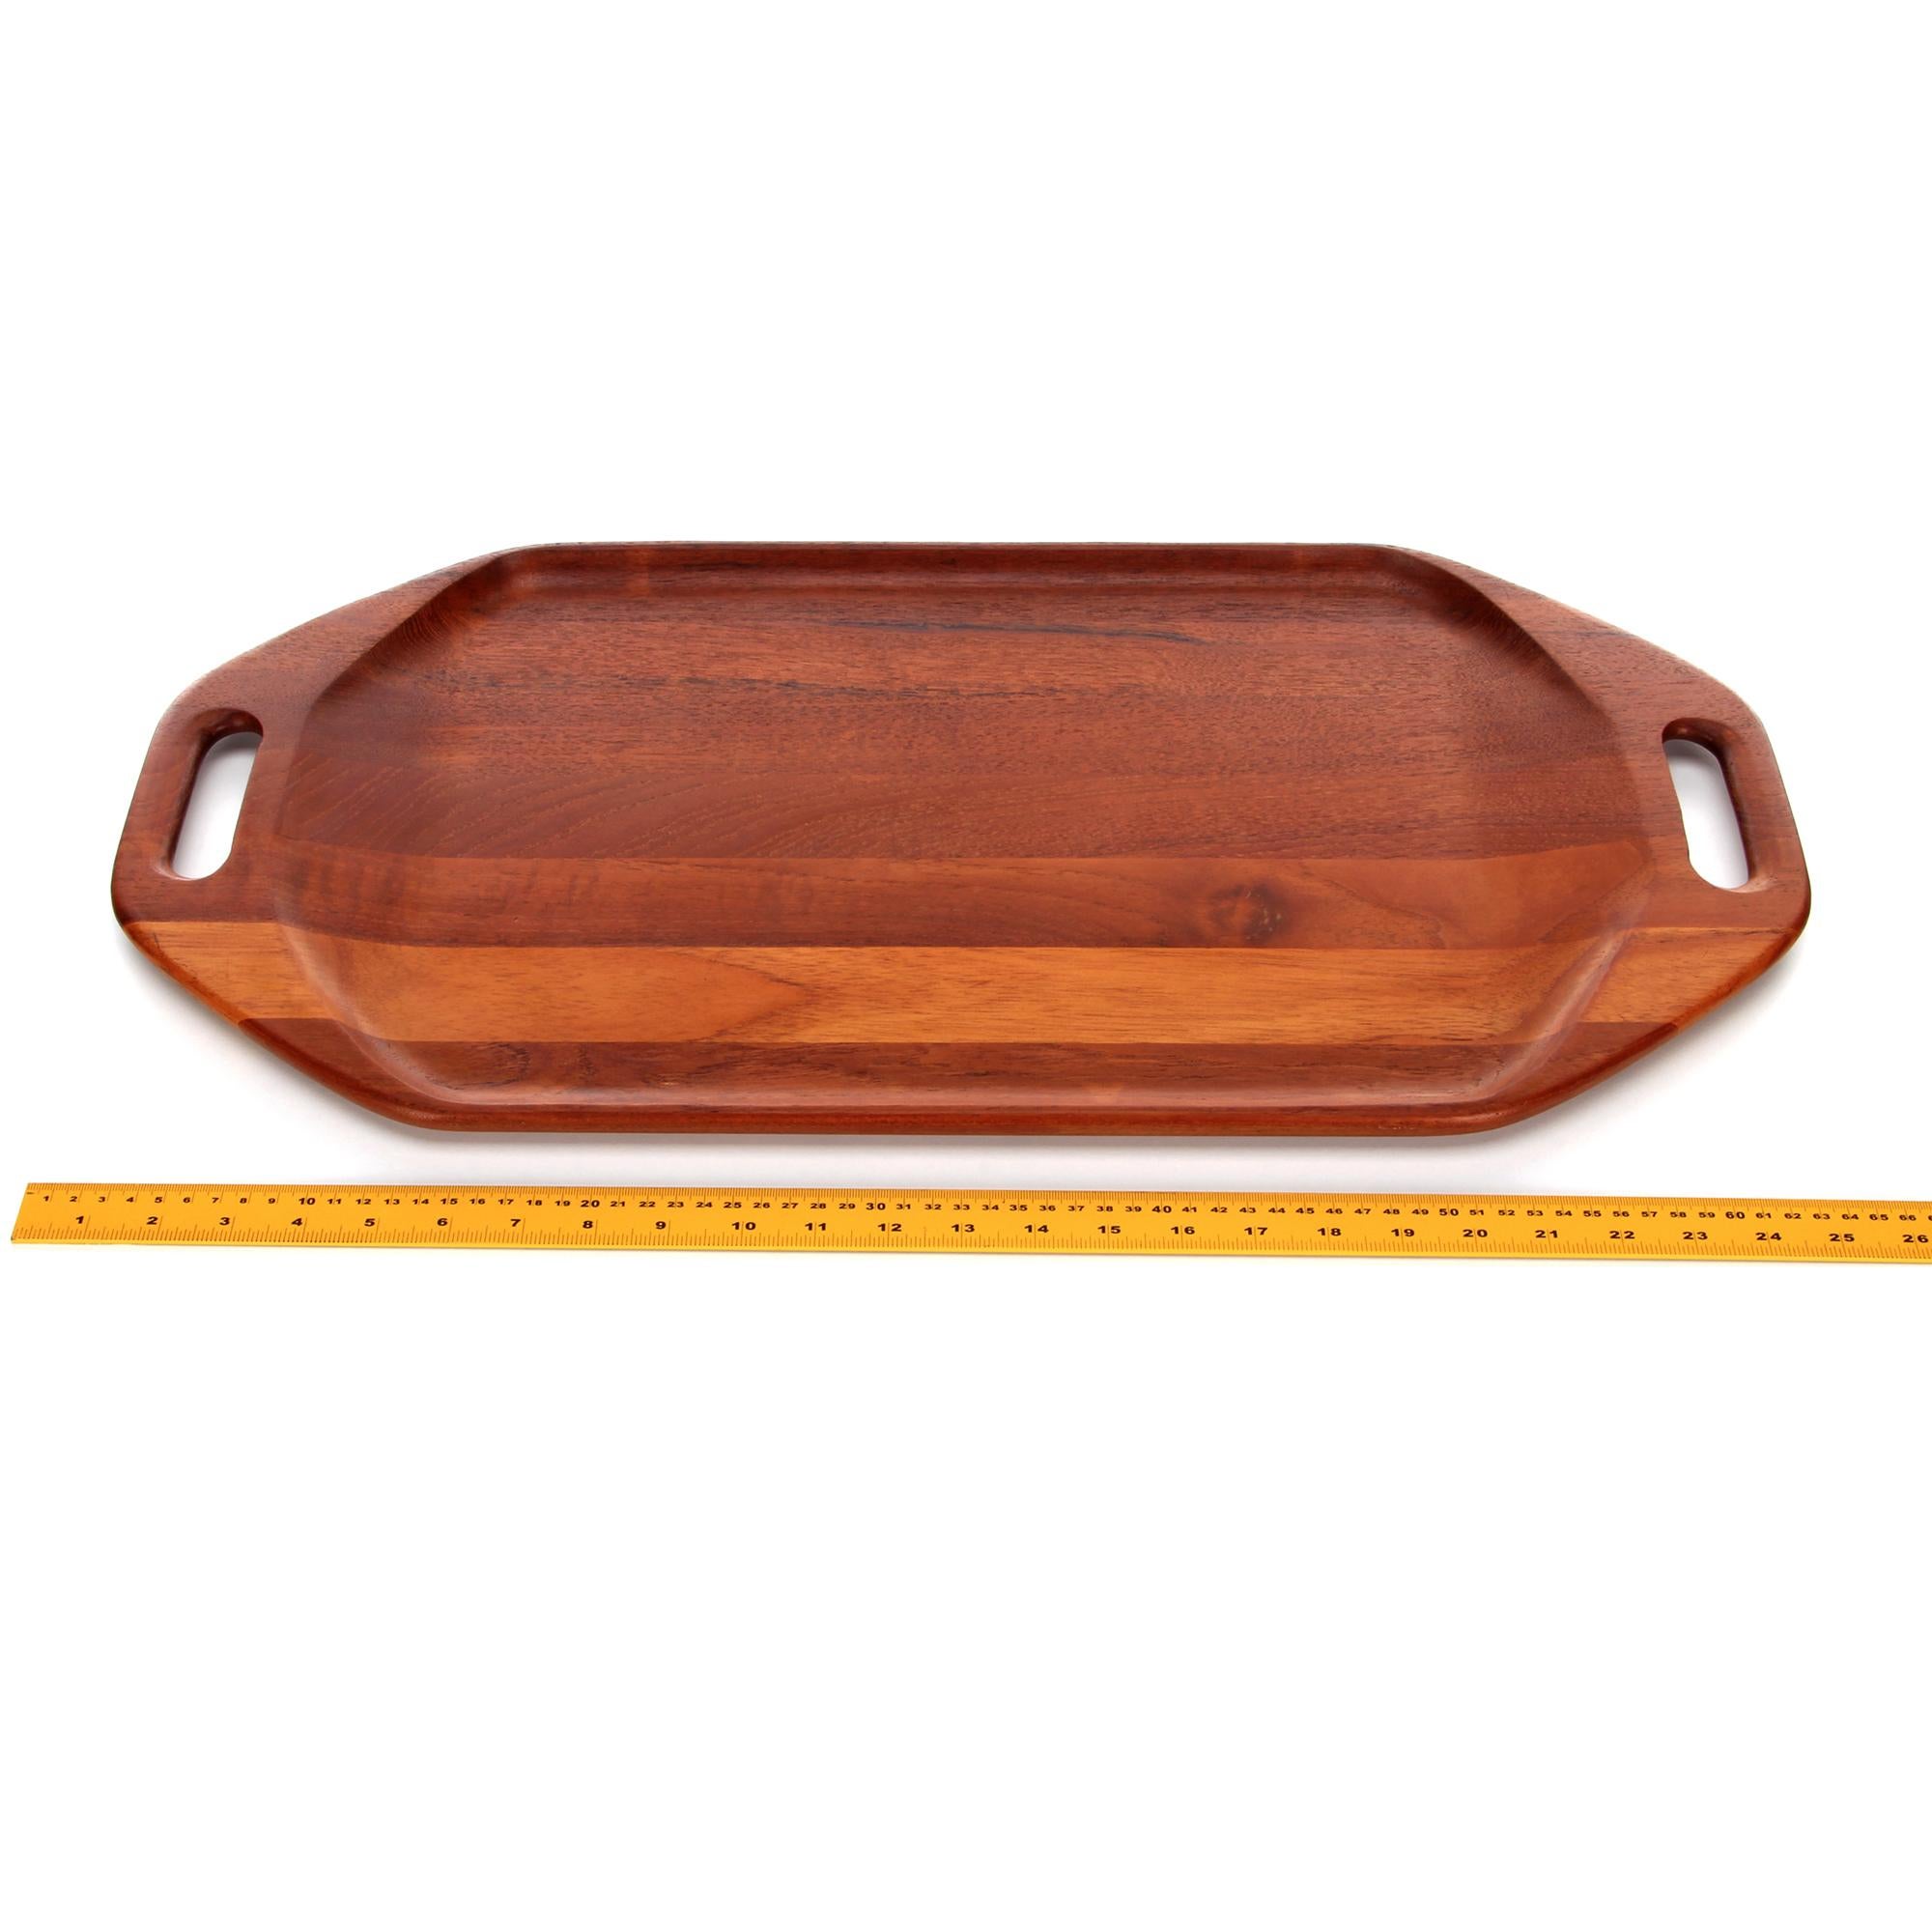 Teak Tray by Digsmed 1964, Large Danish Modern Severing Tray 1